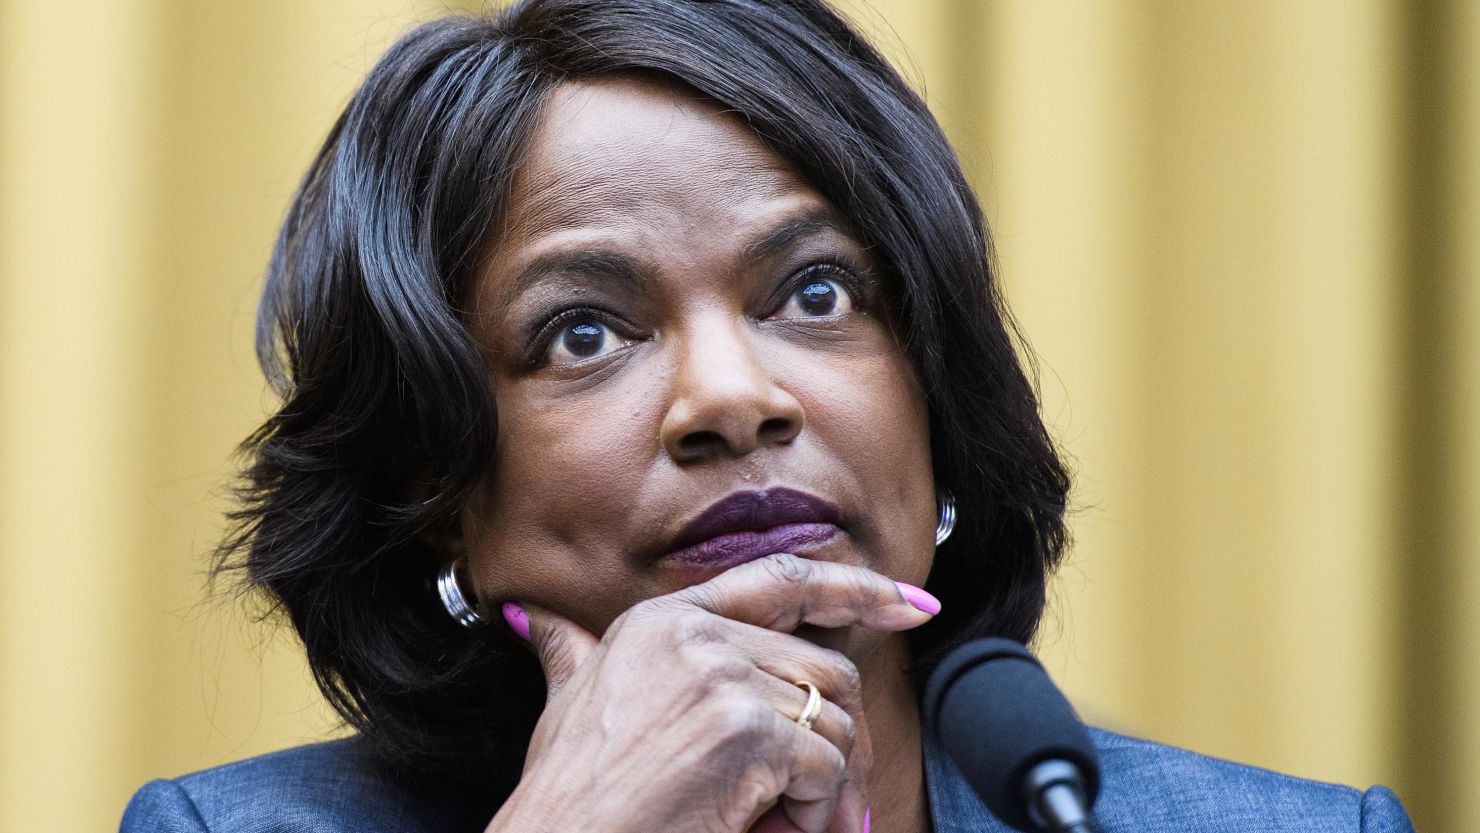 Rep. Val Demings speaks during a House Judiciary Subcommittee on July 29, 2020.